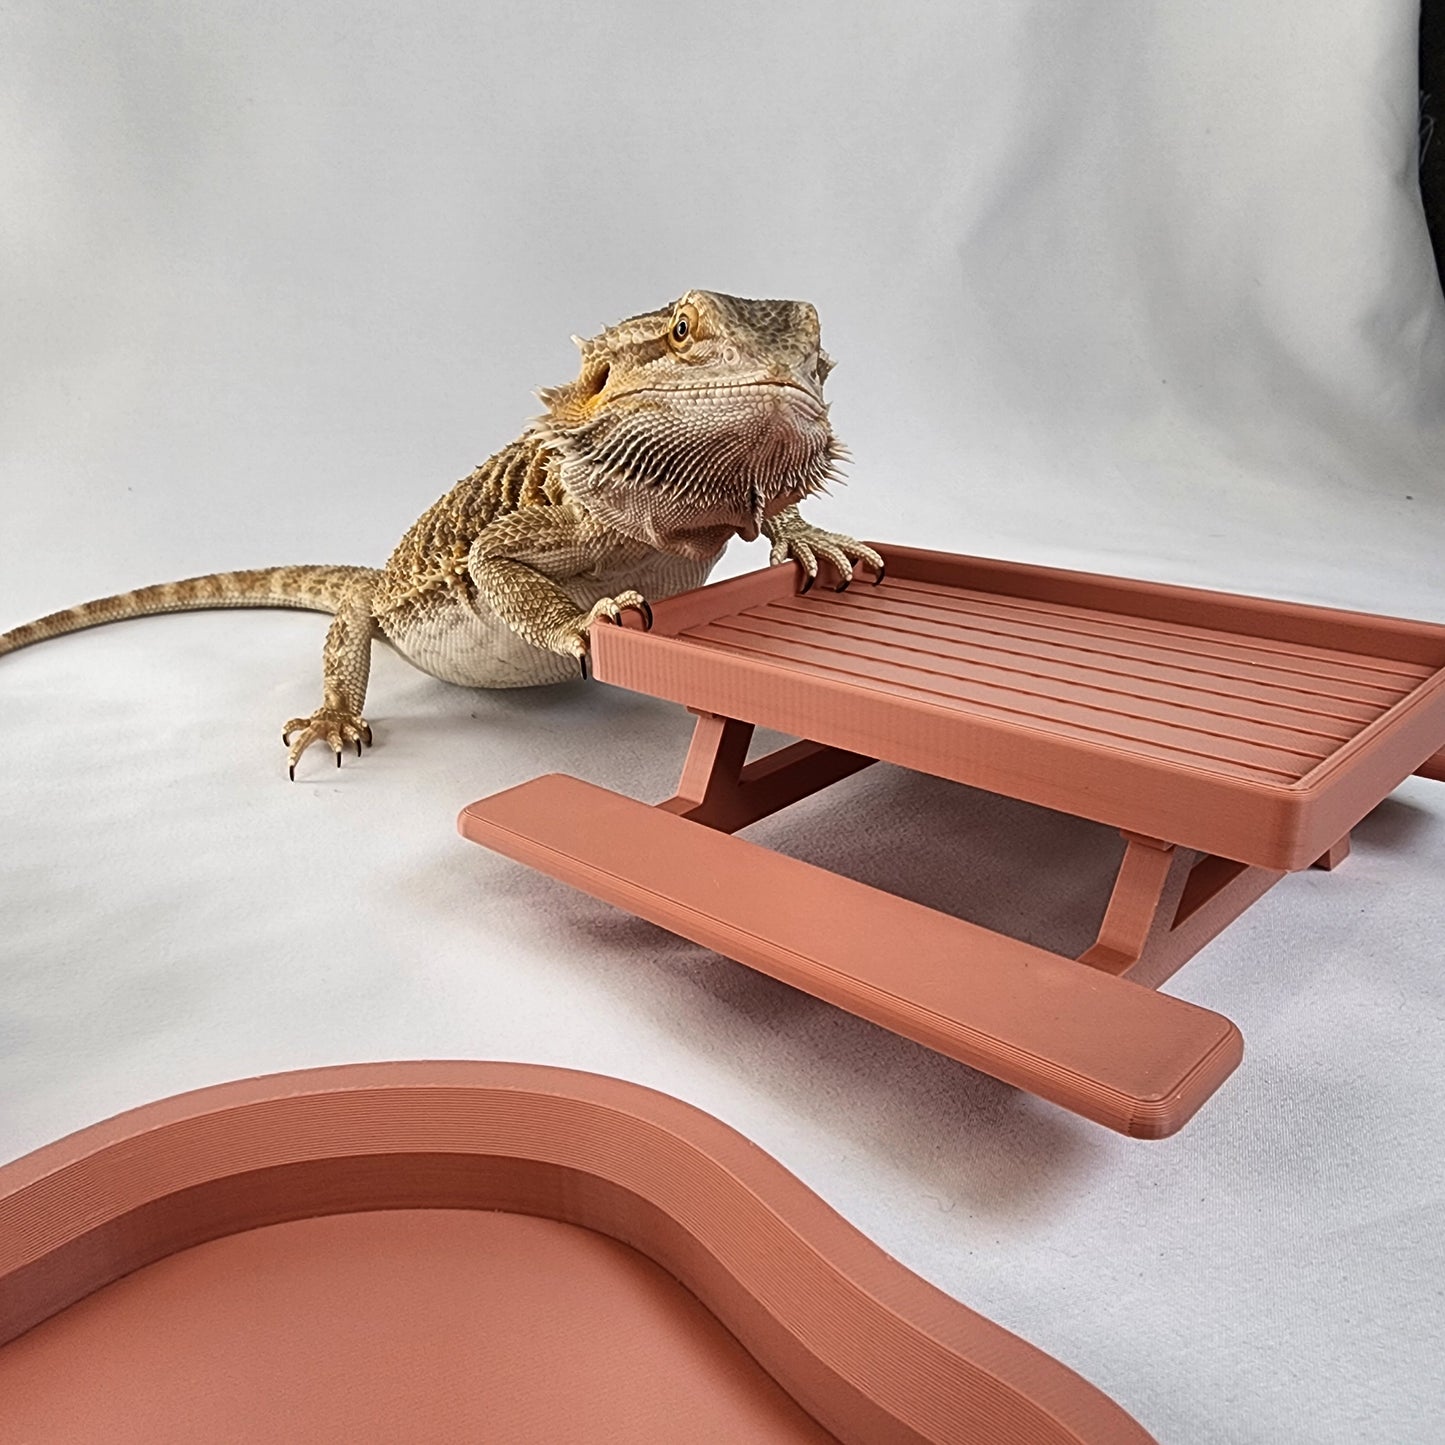 Bearded Dragon Sahara Bundle | Lounge chair, Picnic Table Greens Dish, and Personalized Water Dish